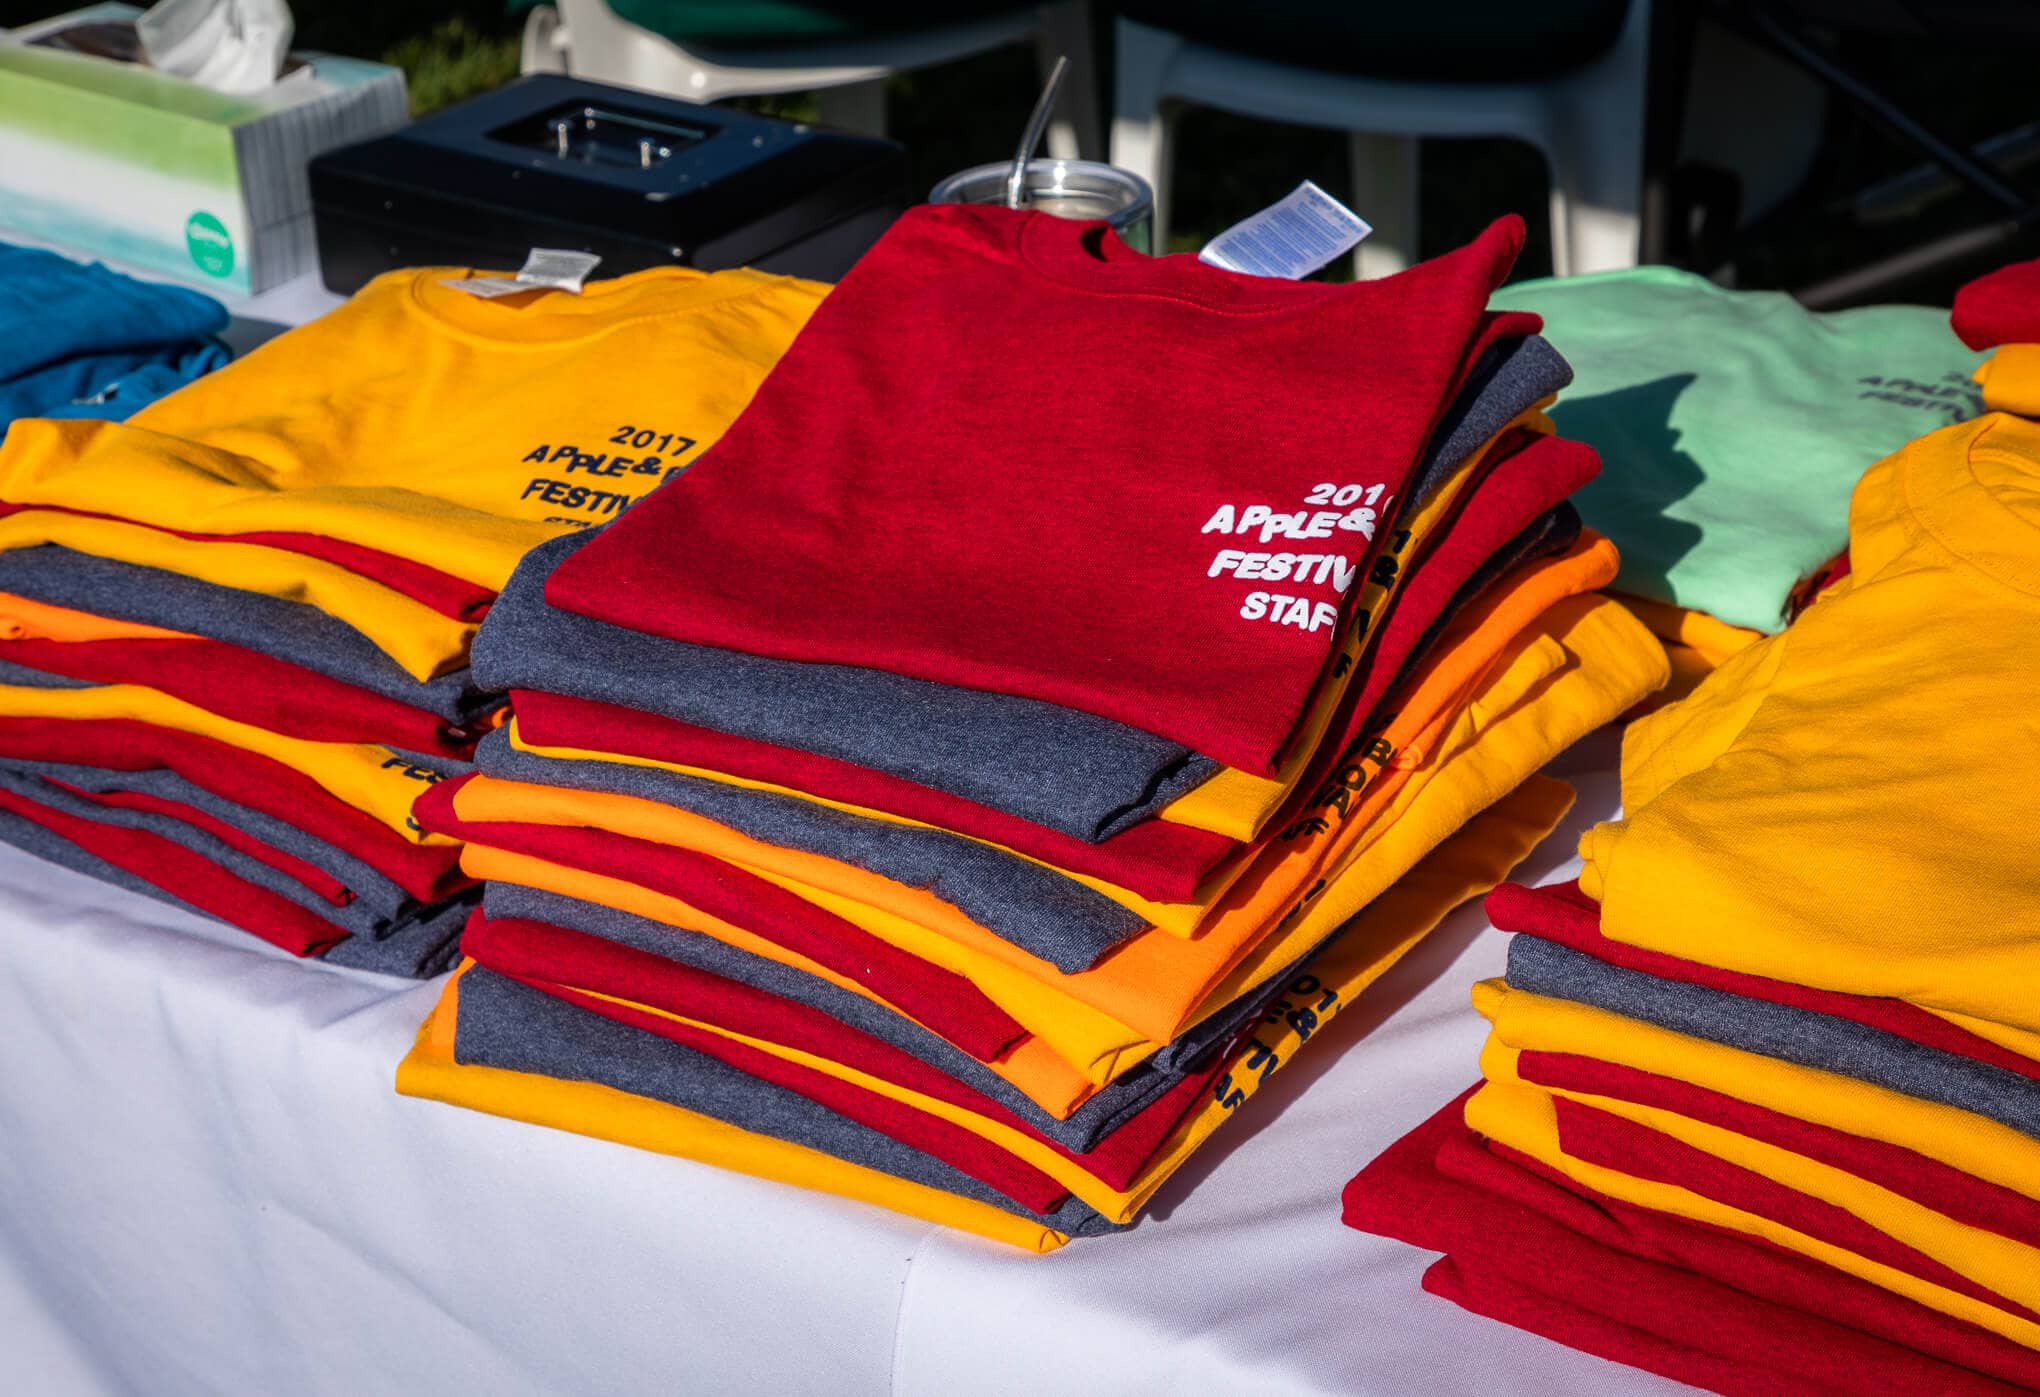 t-shirts for sale at the apple and BBQ festival